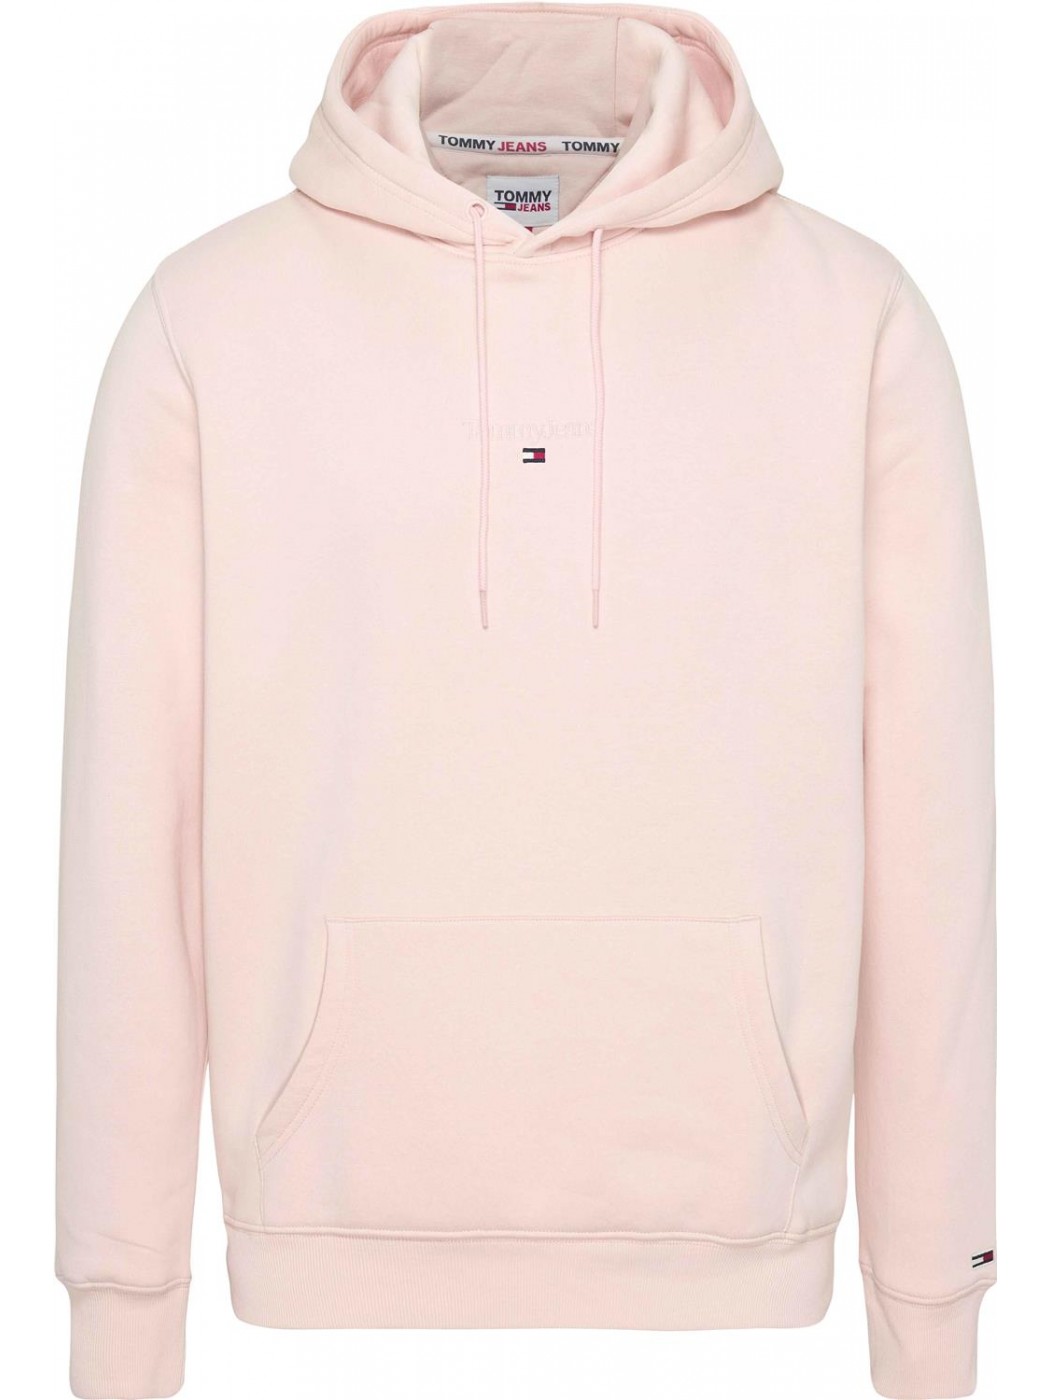 SUDADERA TOMMY JEANS HOMBRE LINEAR LOGO HOODIE ROSA 4